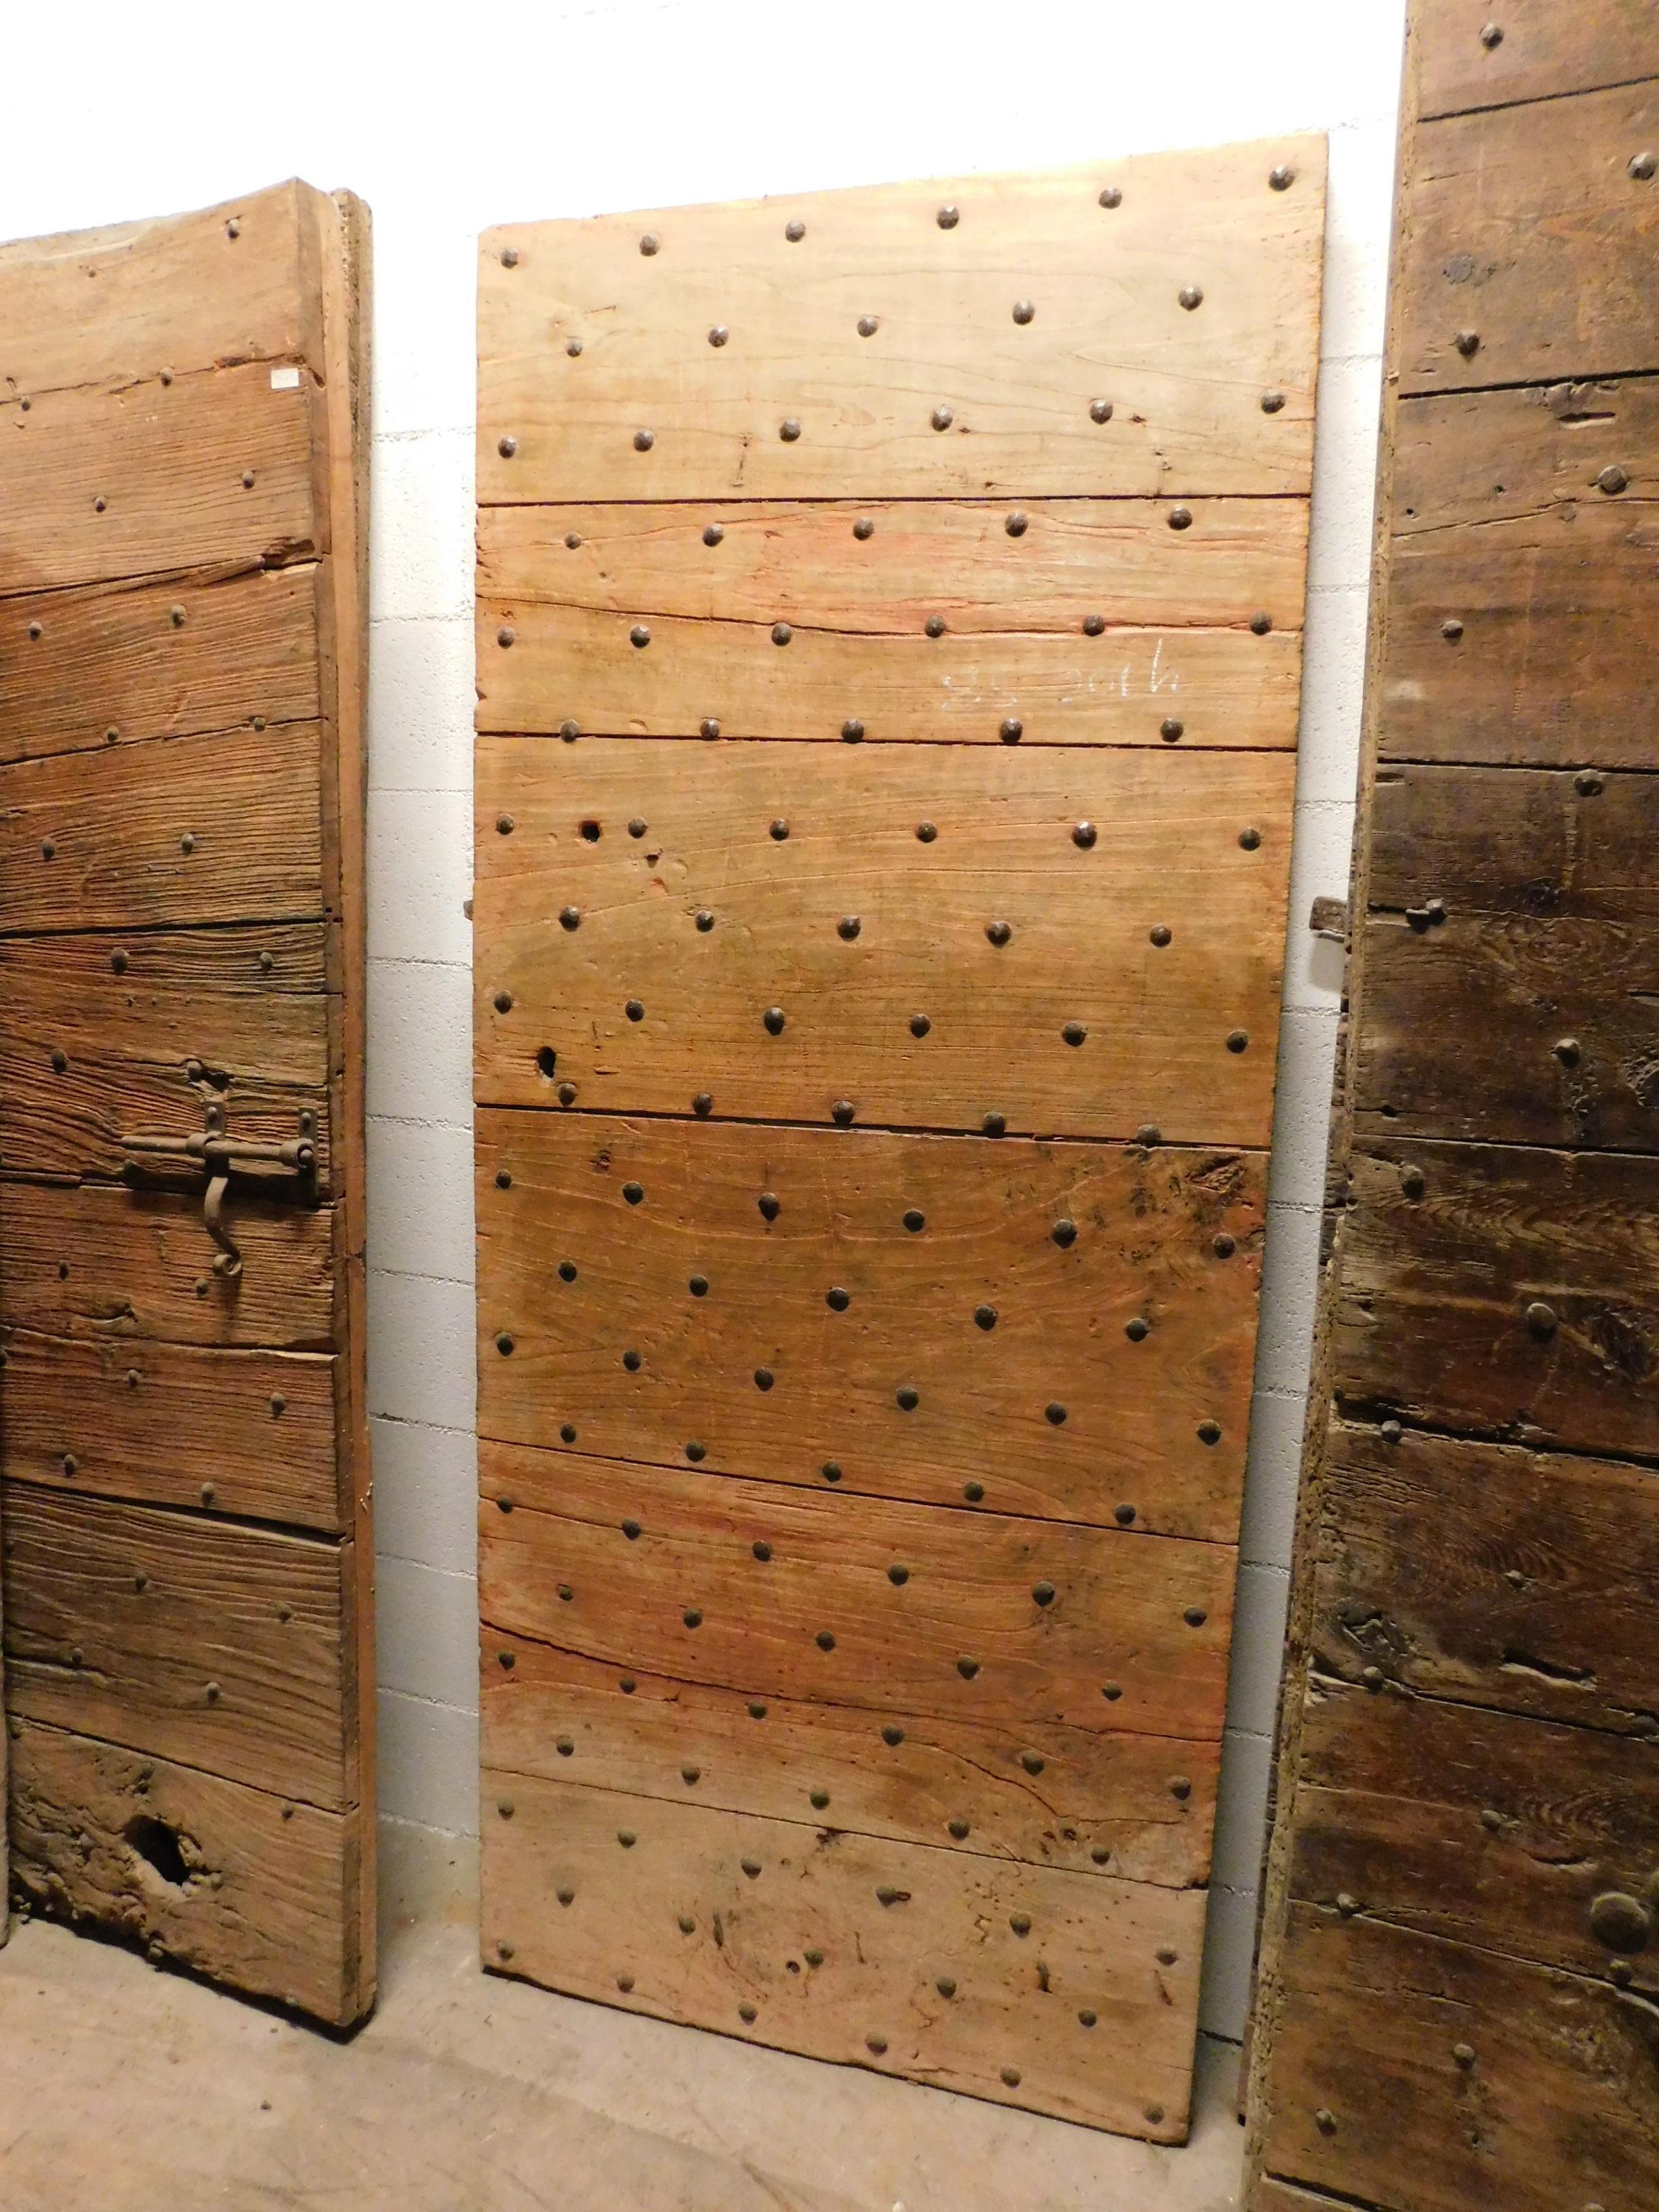 Antique interior door or entrance door (given the thickness) with original nails, built in poplar in the 19th century for a rustic farmhouse in Italy.
Smooth back, with only irons, original iron lock and handle, therefore the possibility of making